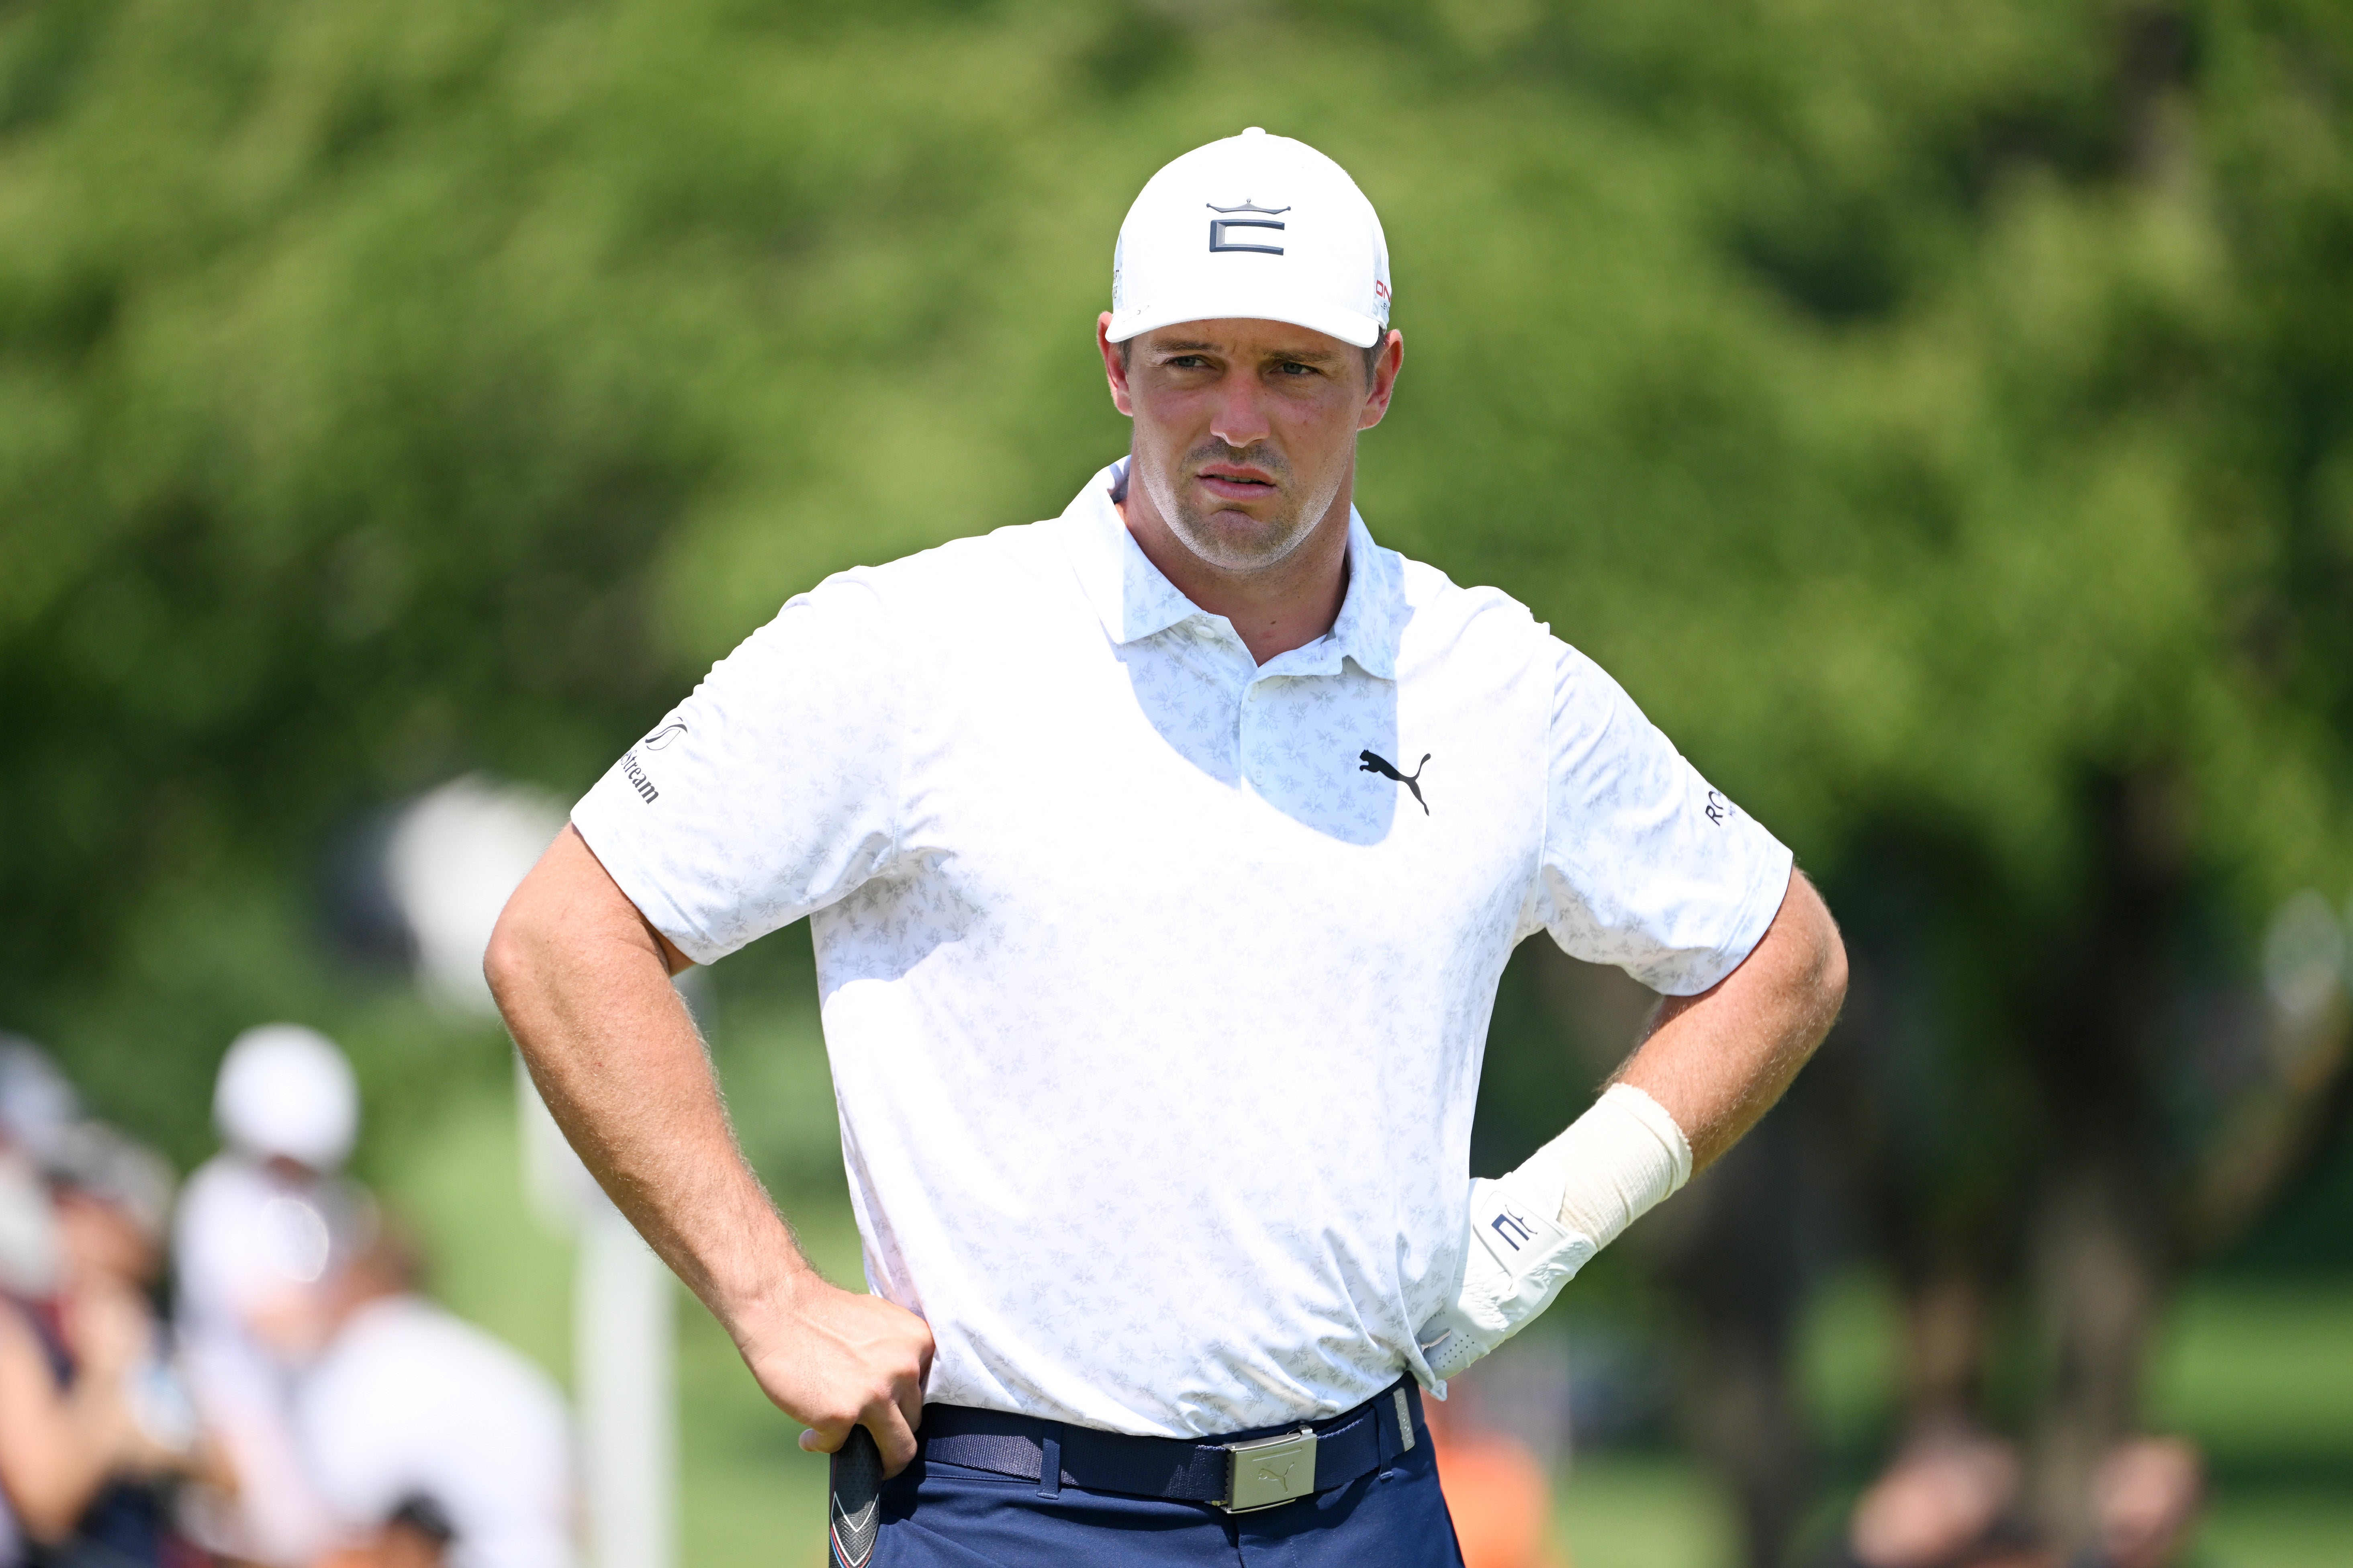 The former US Open champion has not competed since missing the cut in last month’s Masters